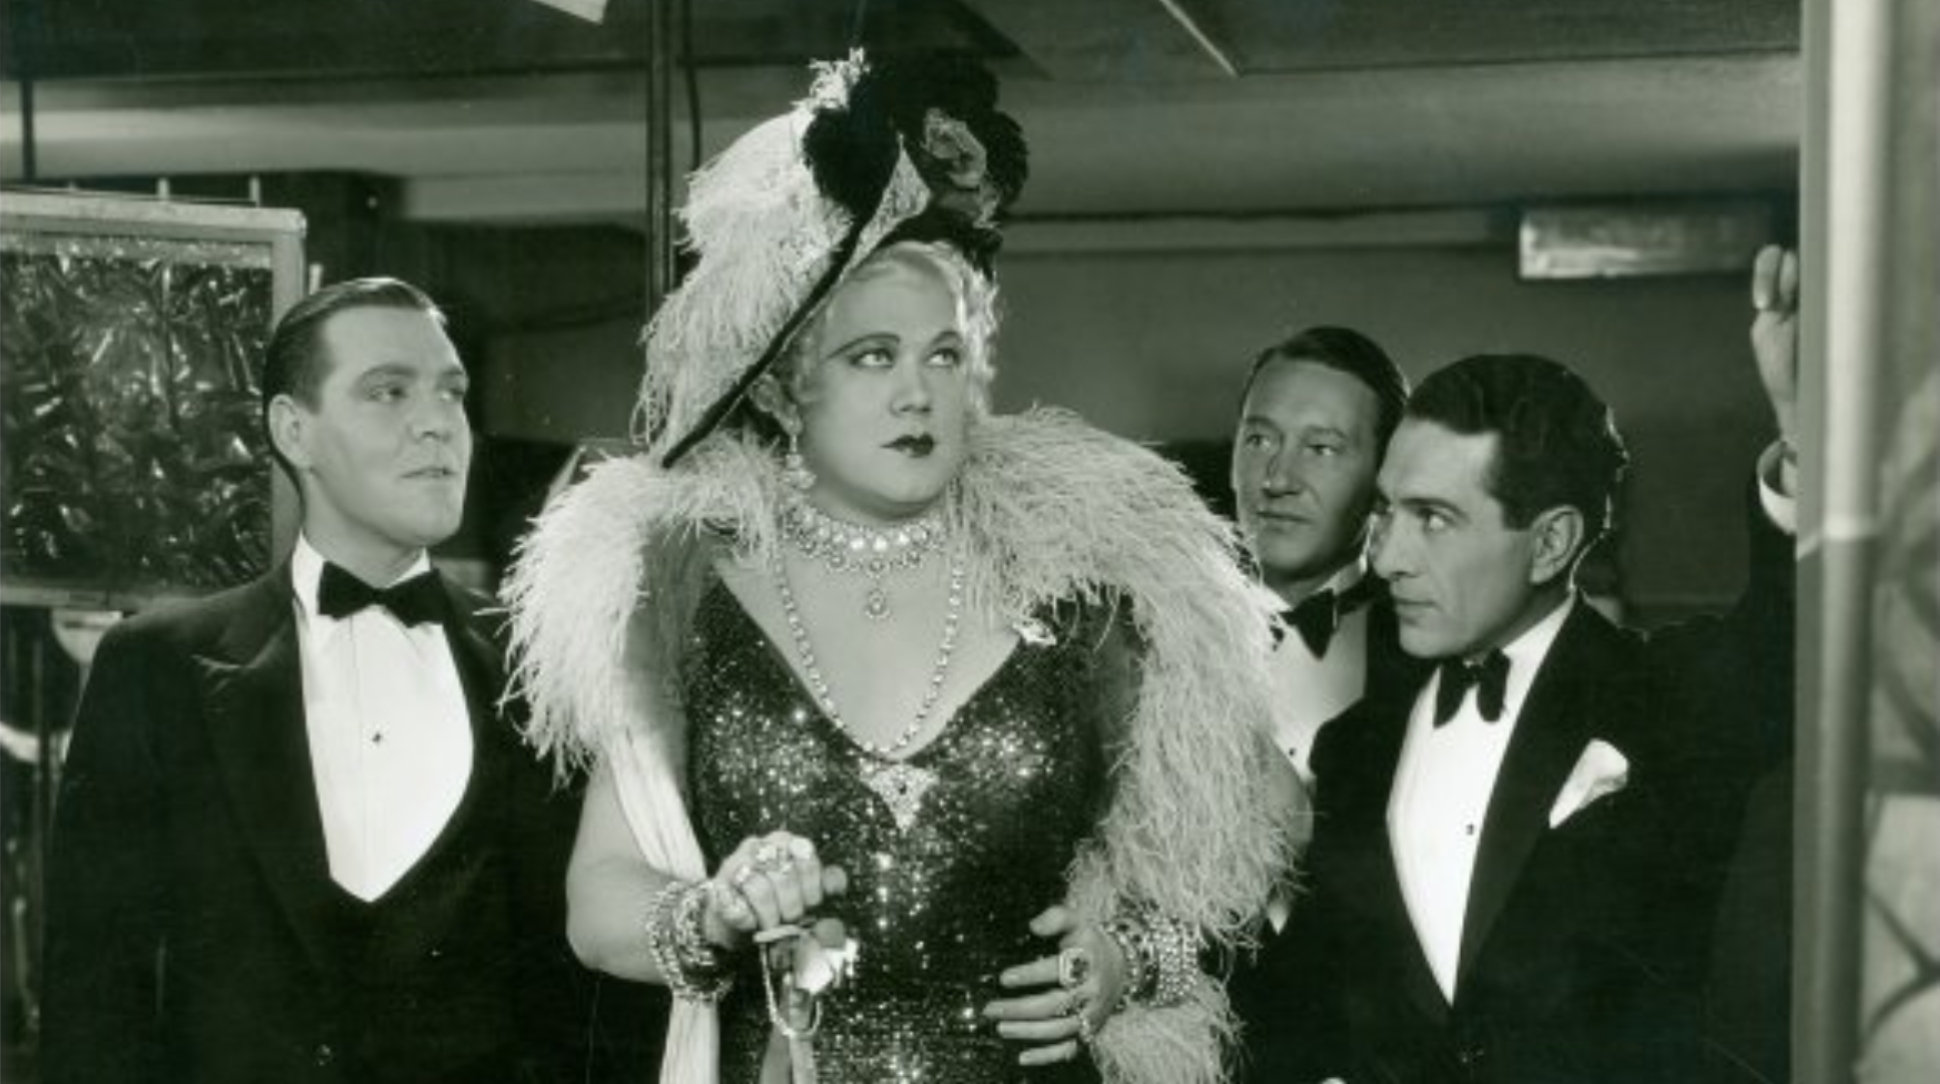 A group of people in suits standing around drag queen Jean Malin